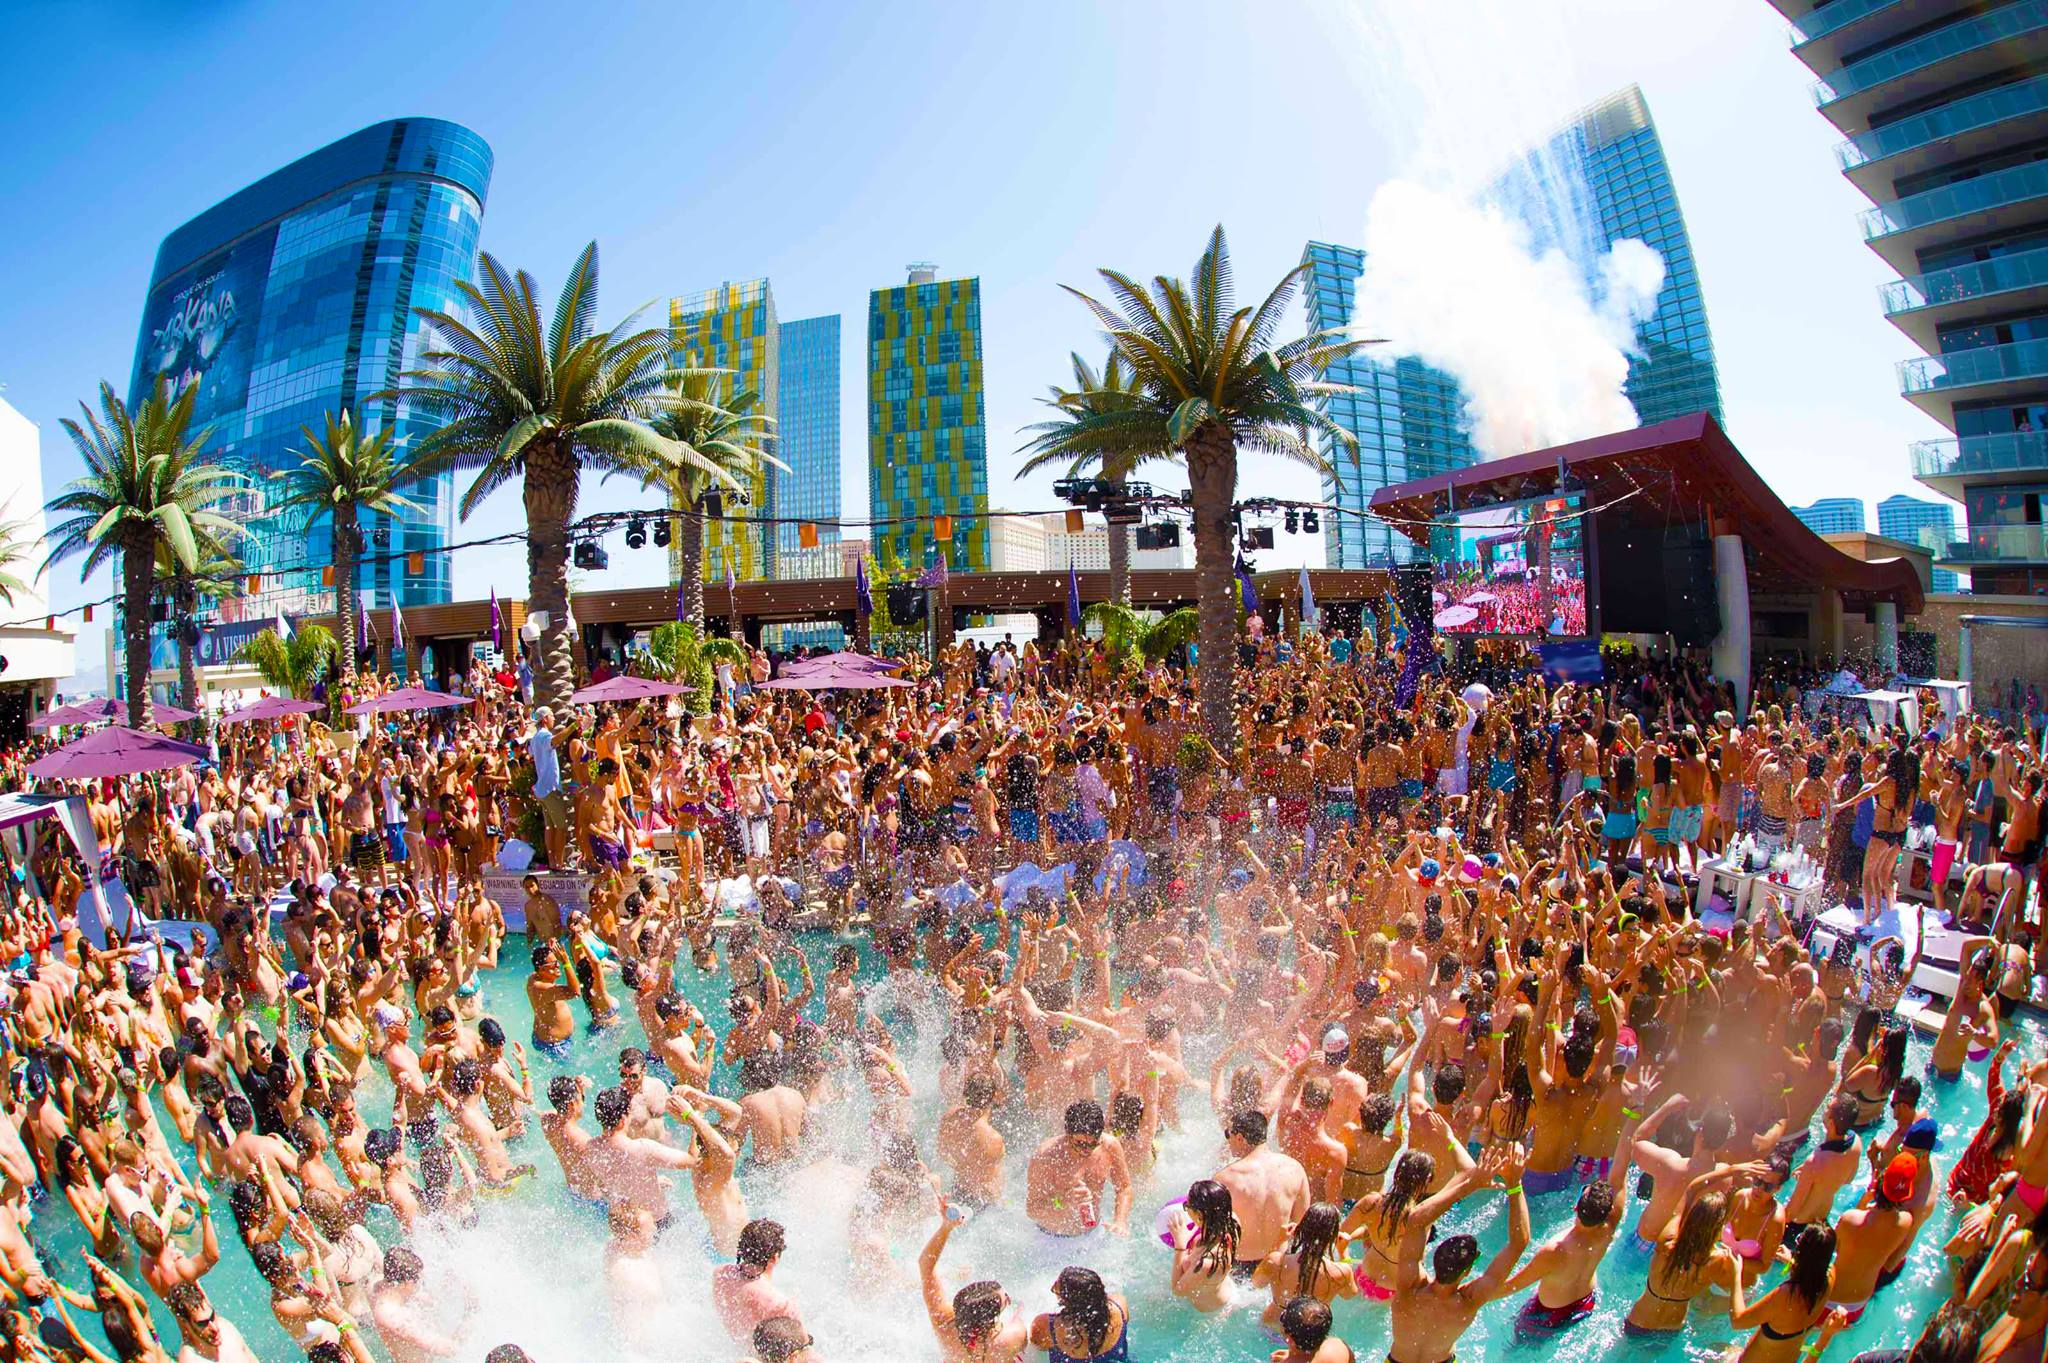 Marquee Las Vegas Announces Their Pool is Opening Up Starting